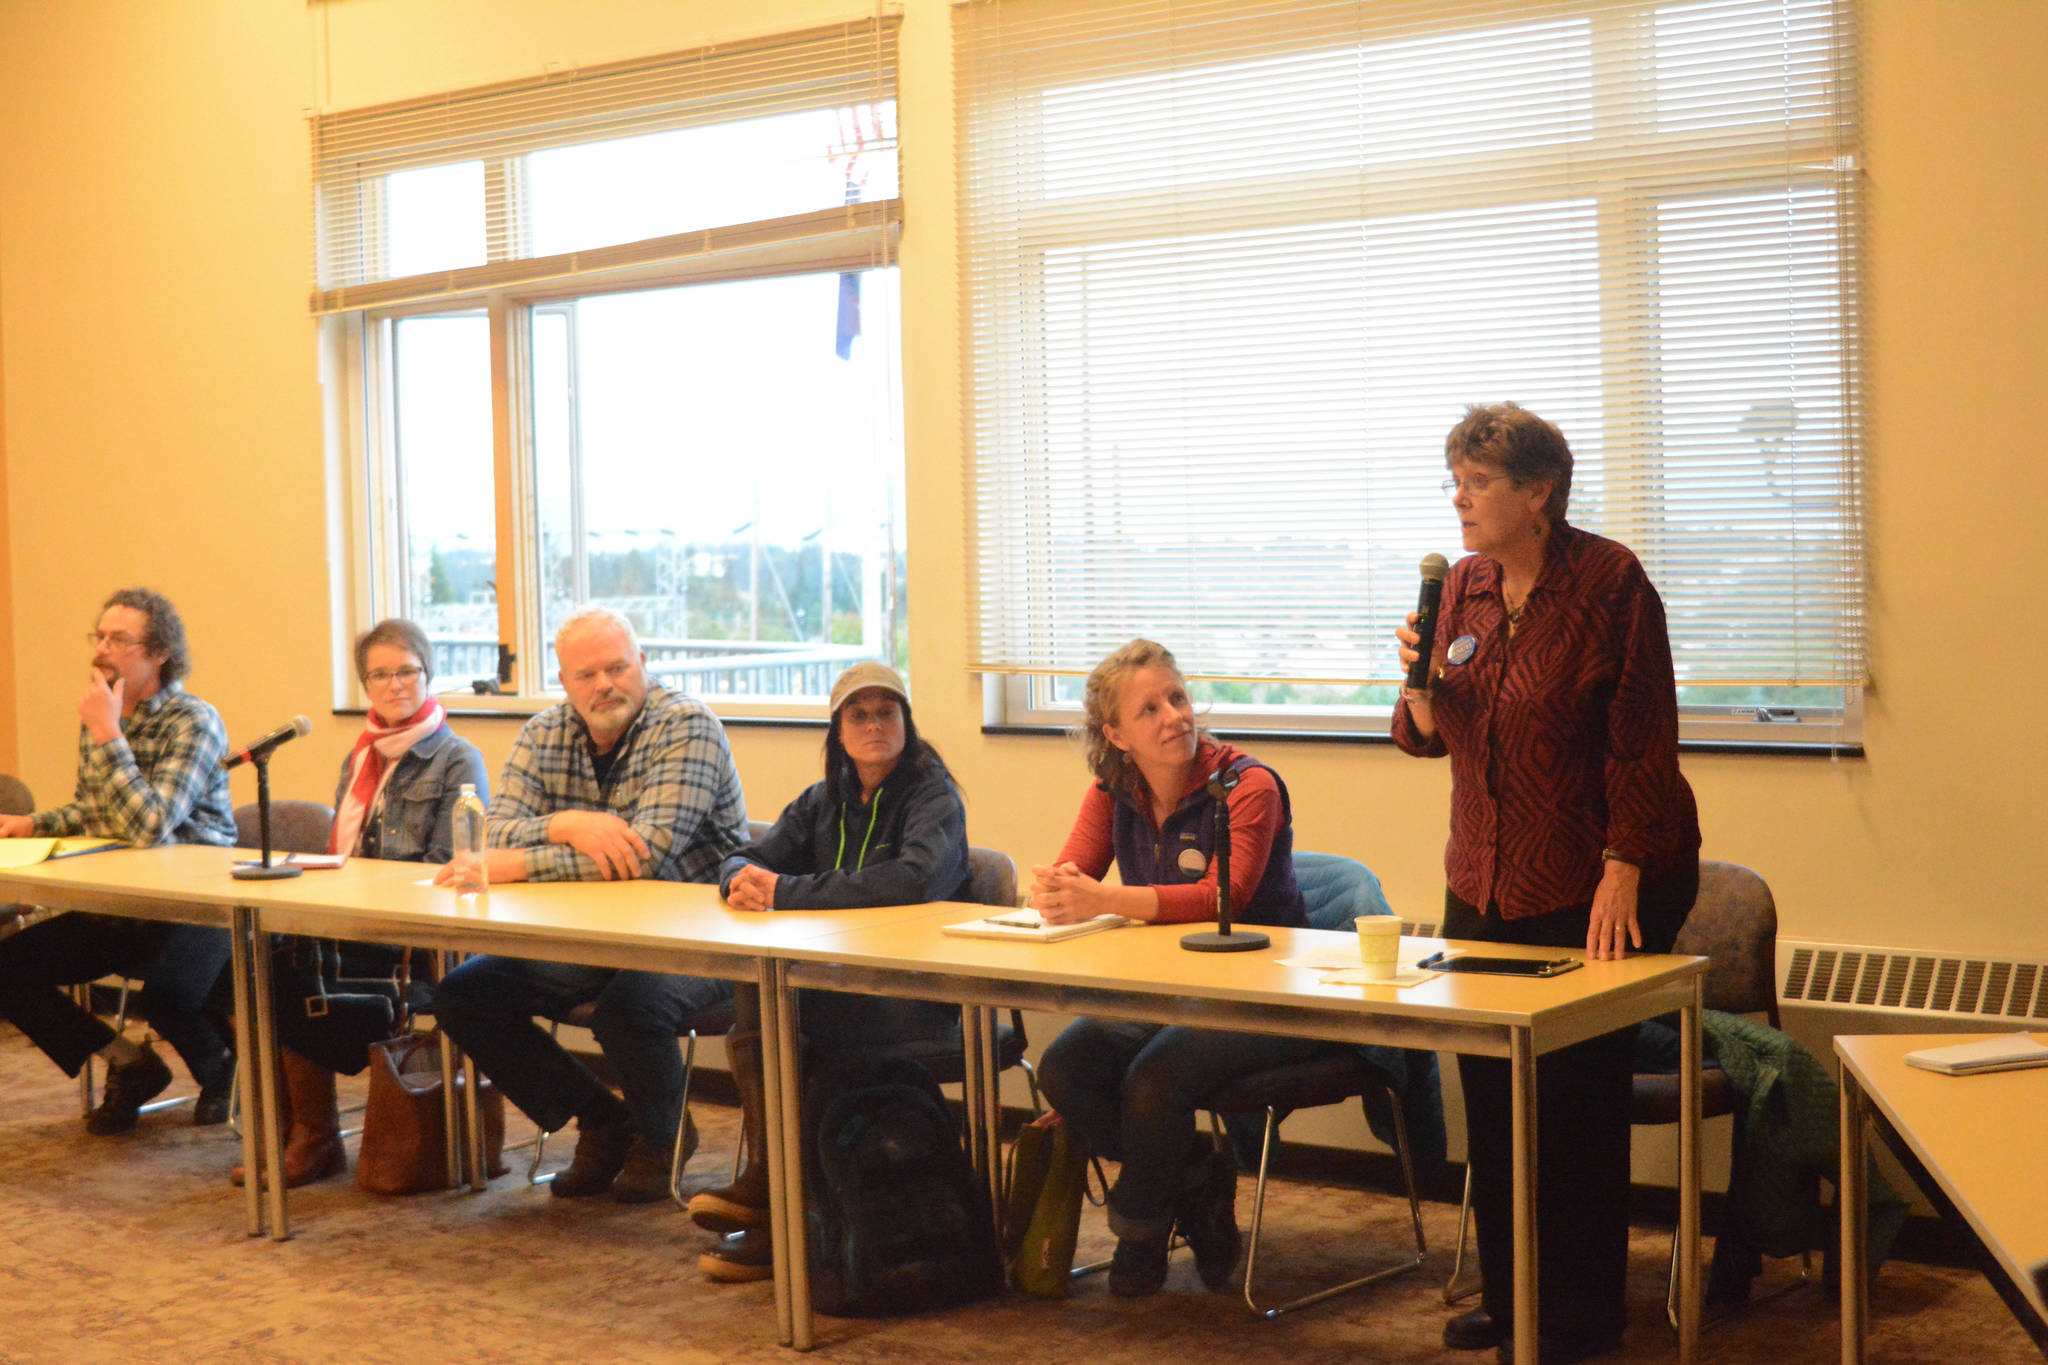 Homer City Council candidate Caroline Venuti, right, speaks at a candidates forum on Thursday, Sept. 21, at Kachemak Bay Campus. Sponsored by KBBI Public Radio, the candidates answered questions from the audience as well as from KBBI and Homer News reporters. From left to right are candidates Andy Kita, Sarah Vance, Dwayne Nustvold Jr., Kimberly Ketter, Rachel Lord and Venuti. Candidate Stephen Mueller could not make the Sept. 21 forum because of a family commitment, but he did attend a Sept. 28 forum at the Homer Elks Lodge sponsored by the Homer Chamber of Commerce and Visitors Center. (Photo by Michael Armstrong, Homer News)